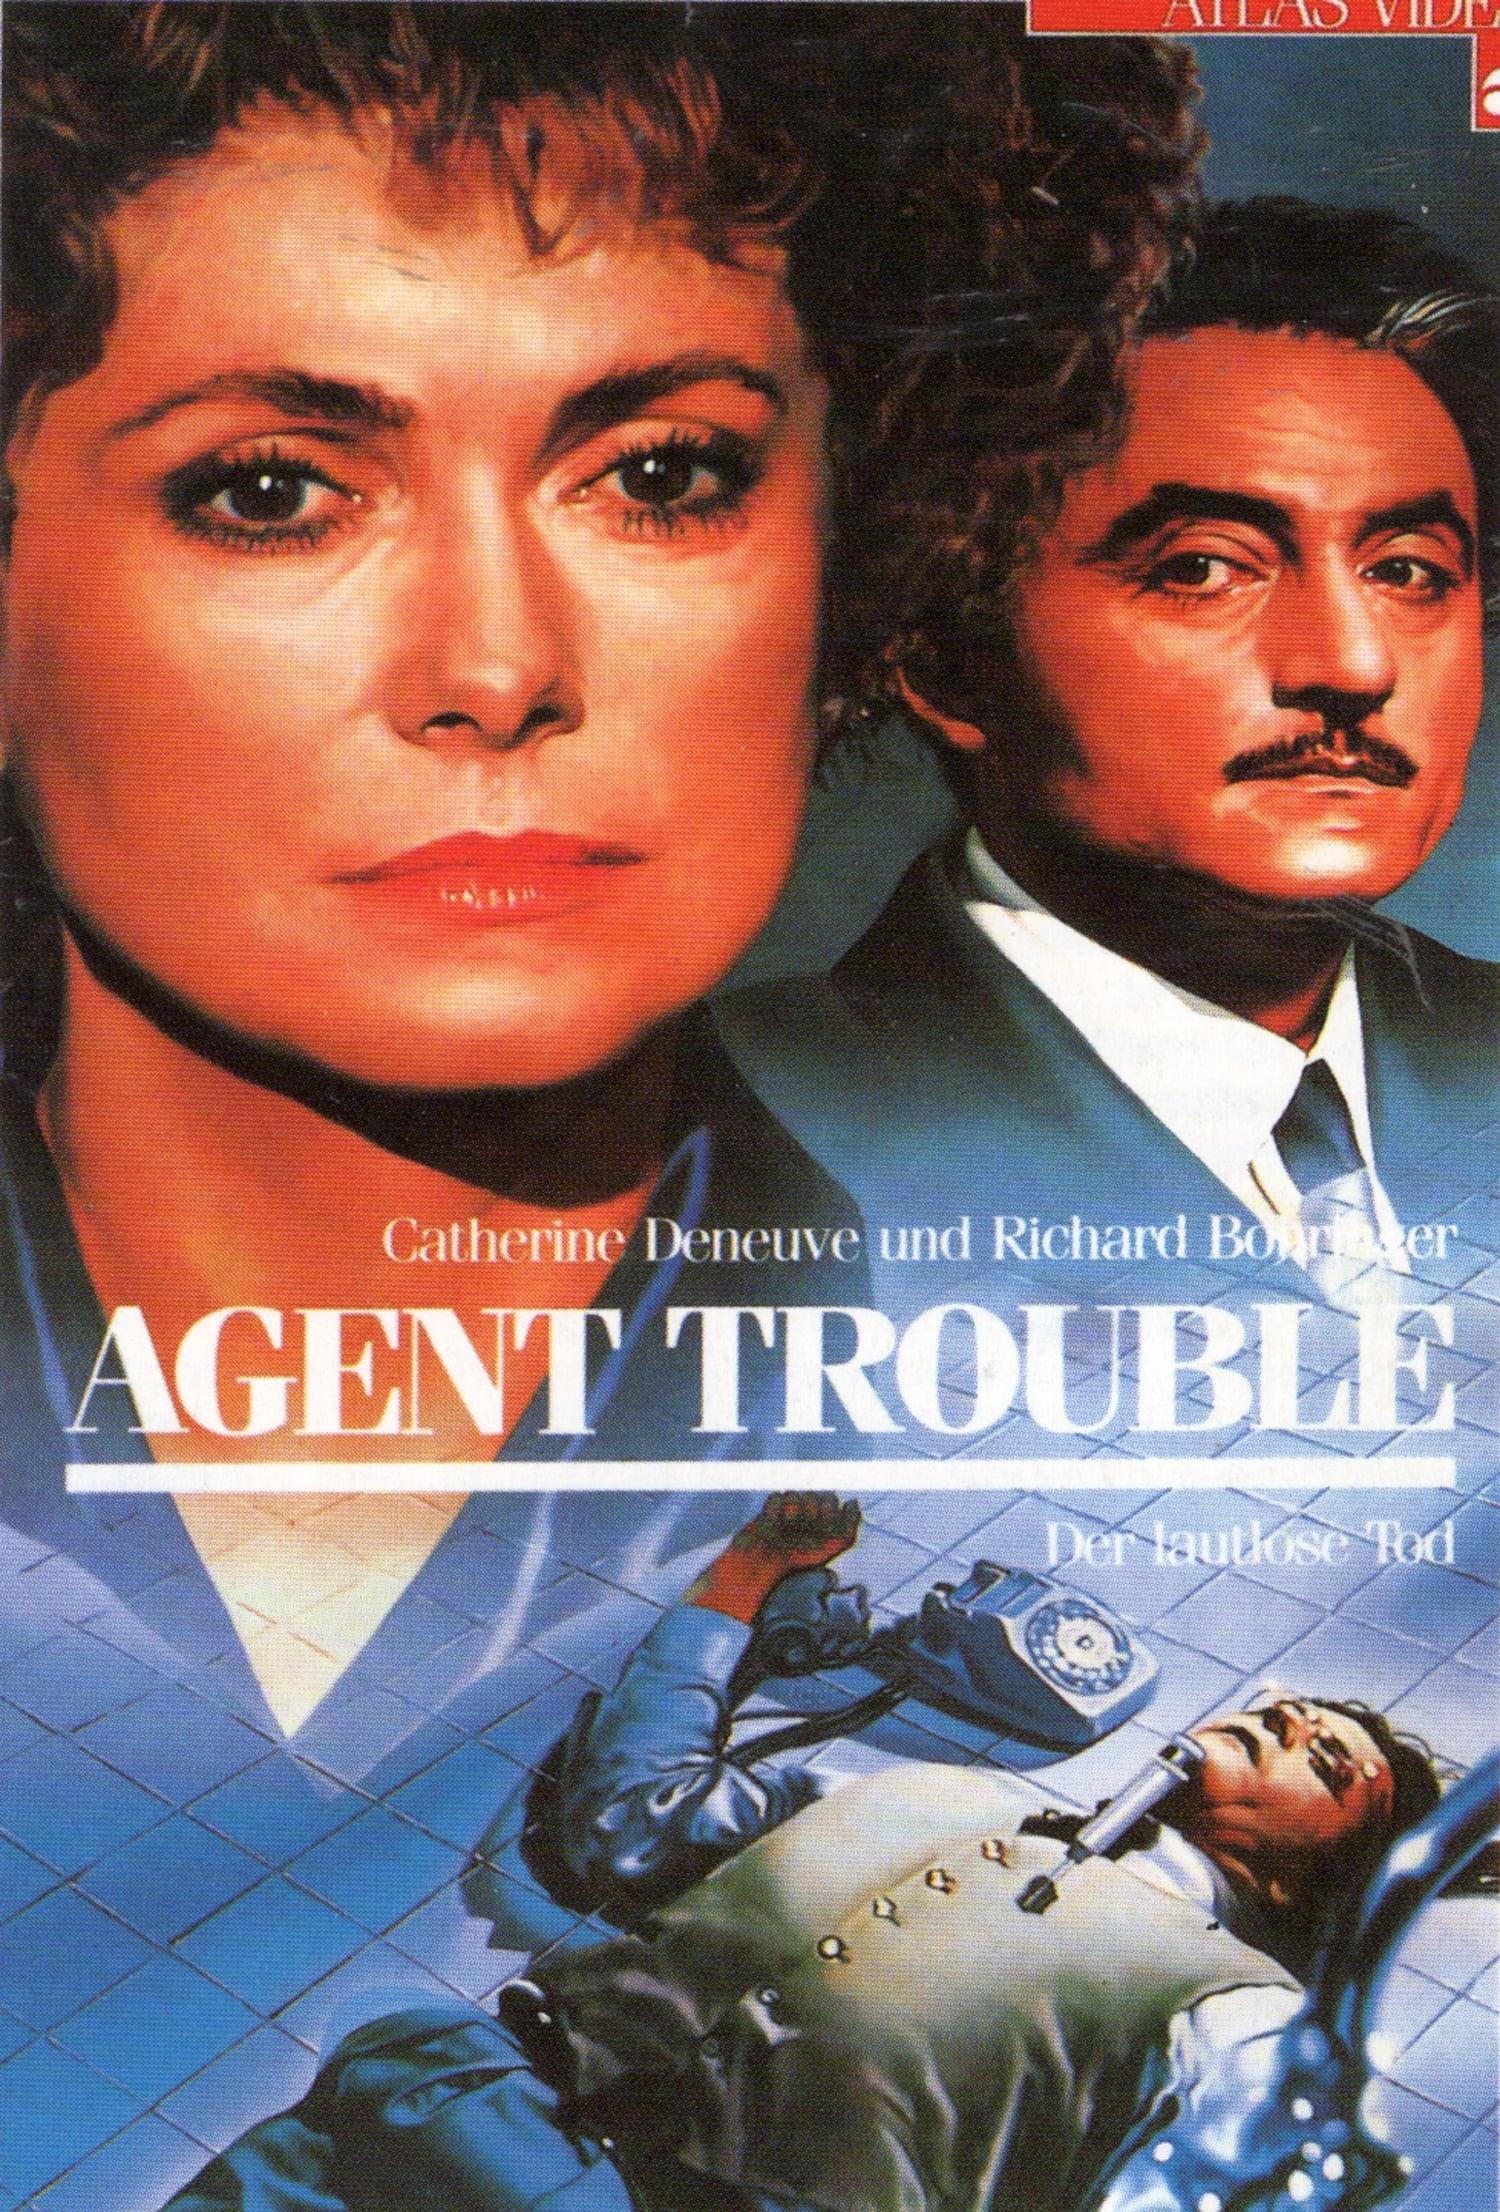 Agent Trouble - Mord aus Versehen poster